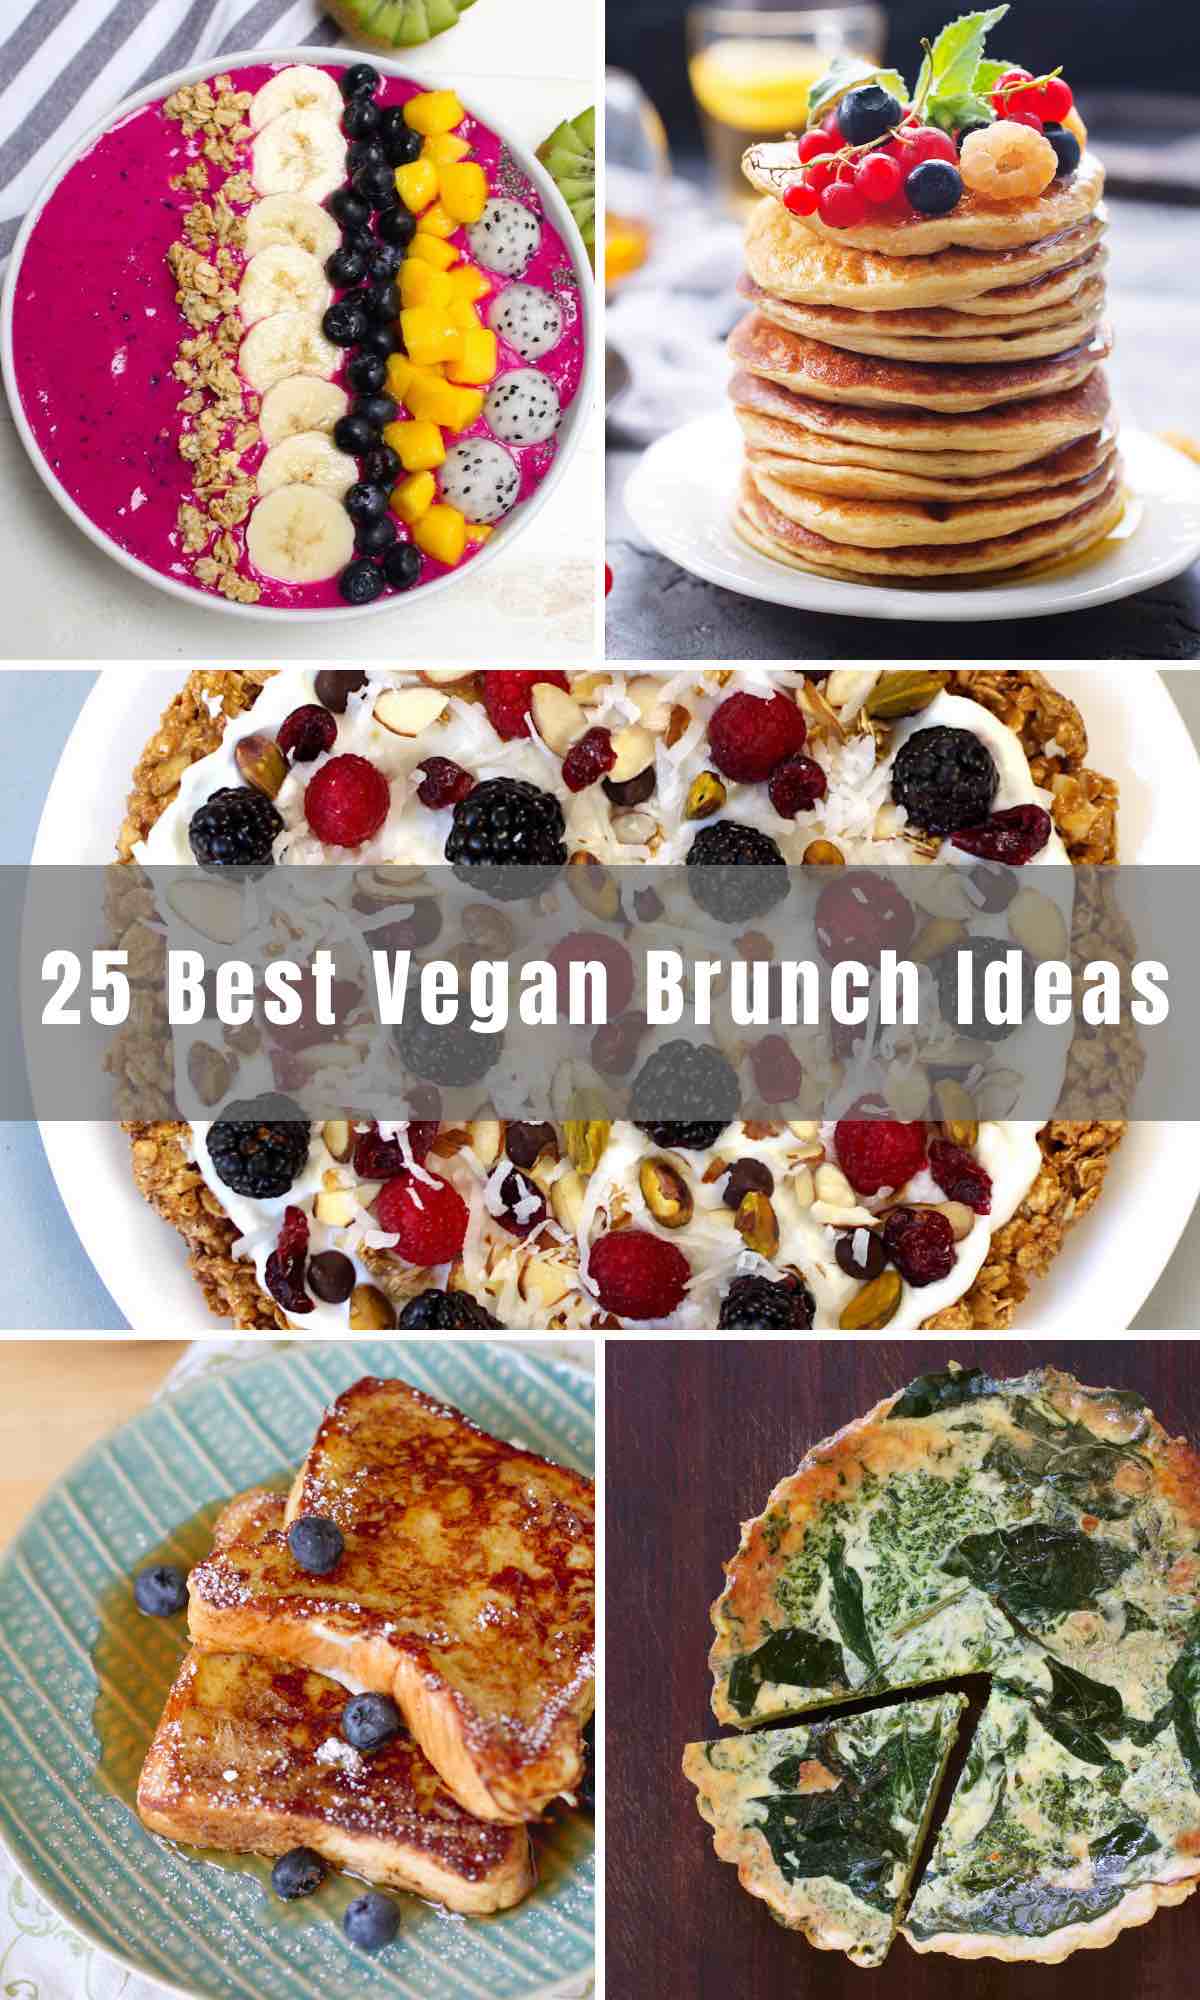 If you’re preparing for a Vegan Brunch, we’ve got you covered. From pancakes and waffles to bagels and smoothie bowls, there are 25 of the best vegan brunch ideas and recipes below. Even your non-vegan guests are sure to enjoy these dishes